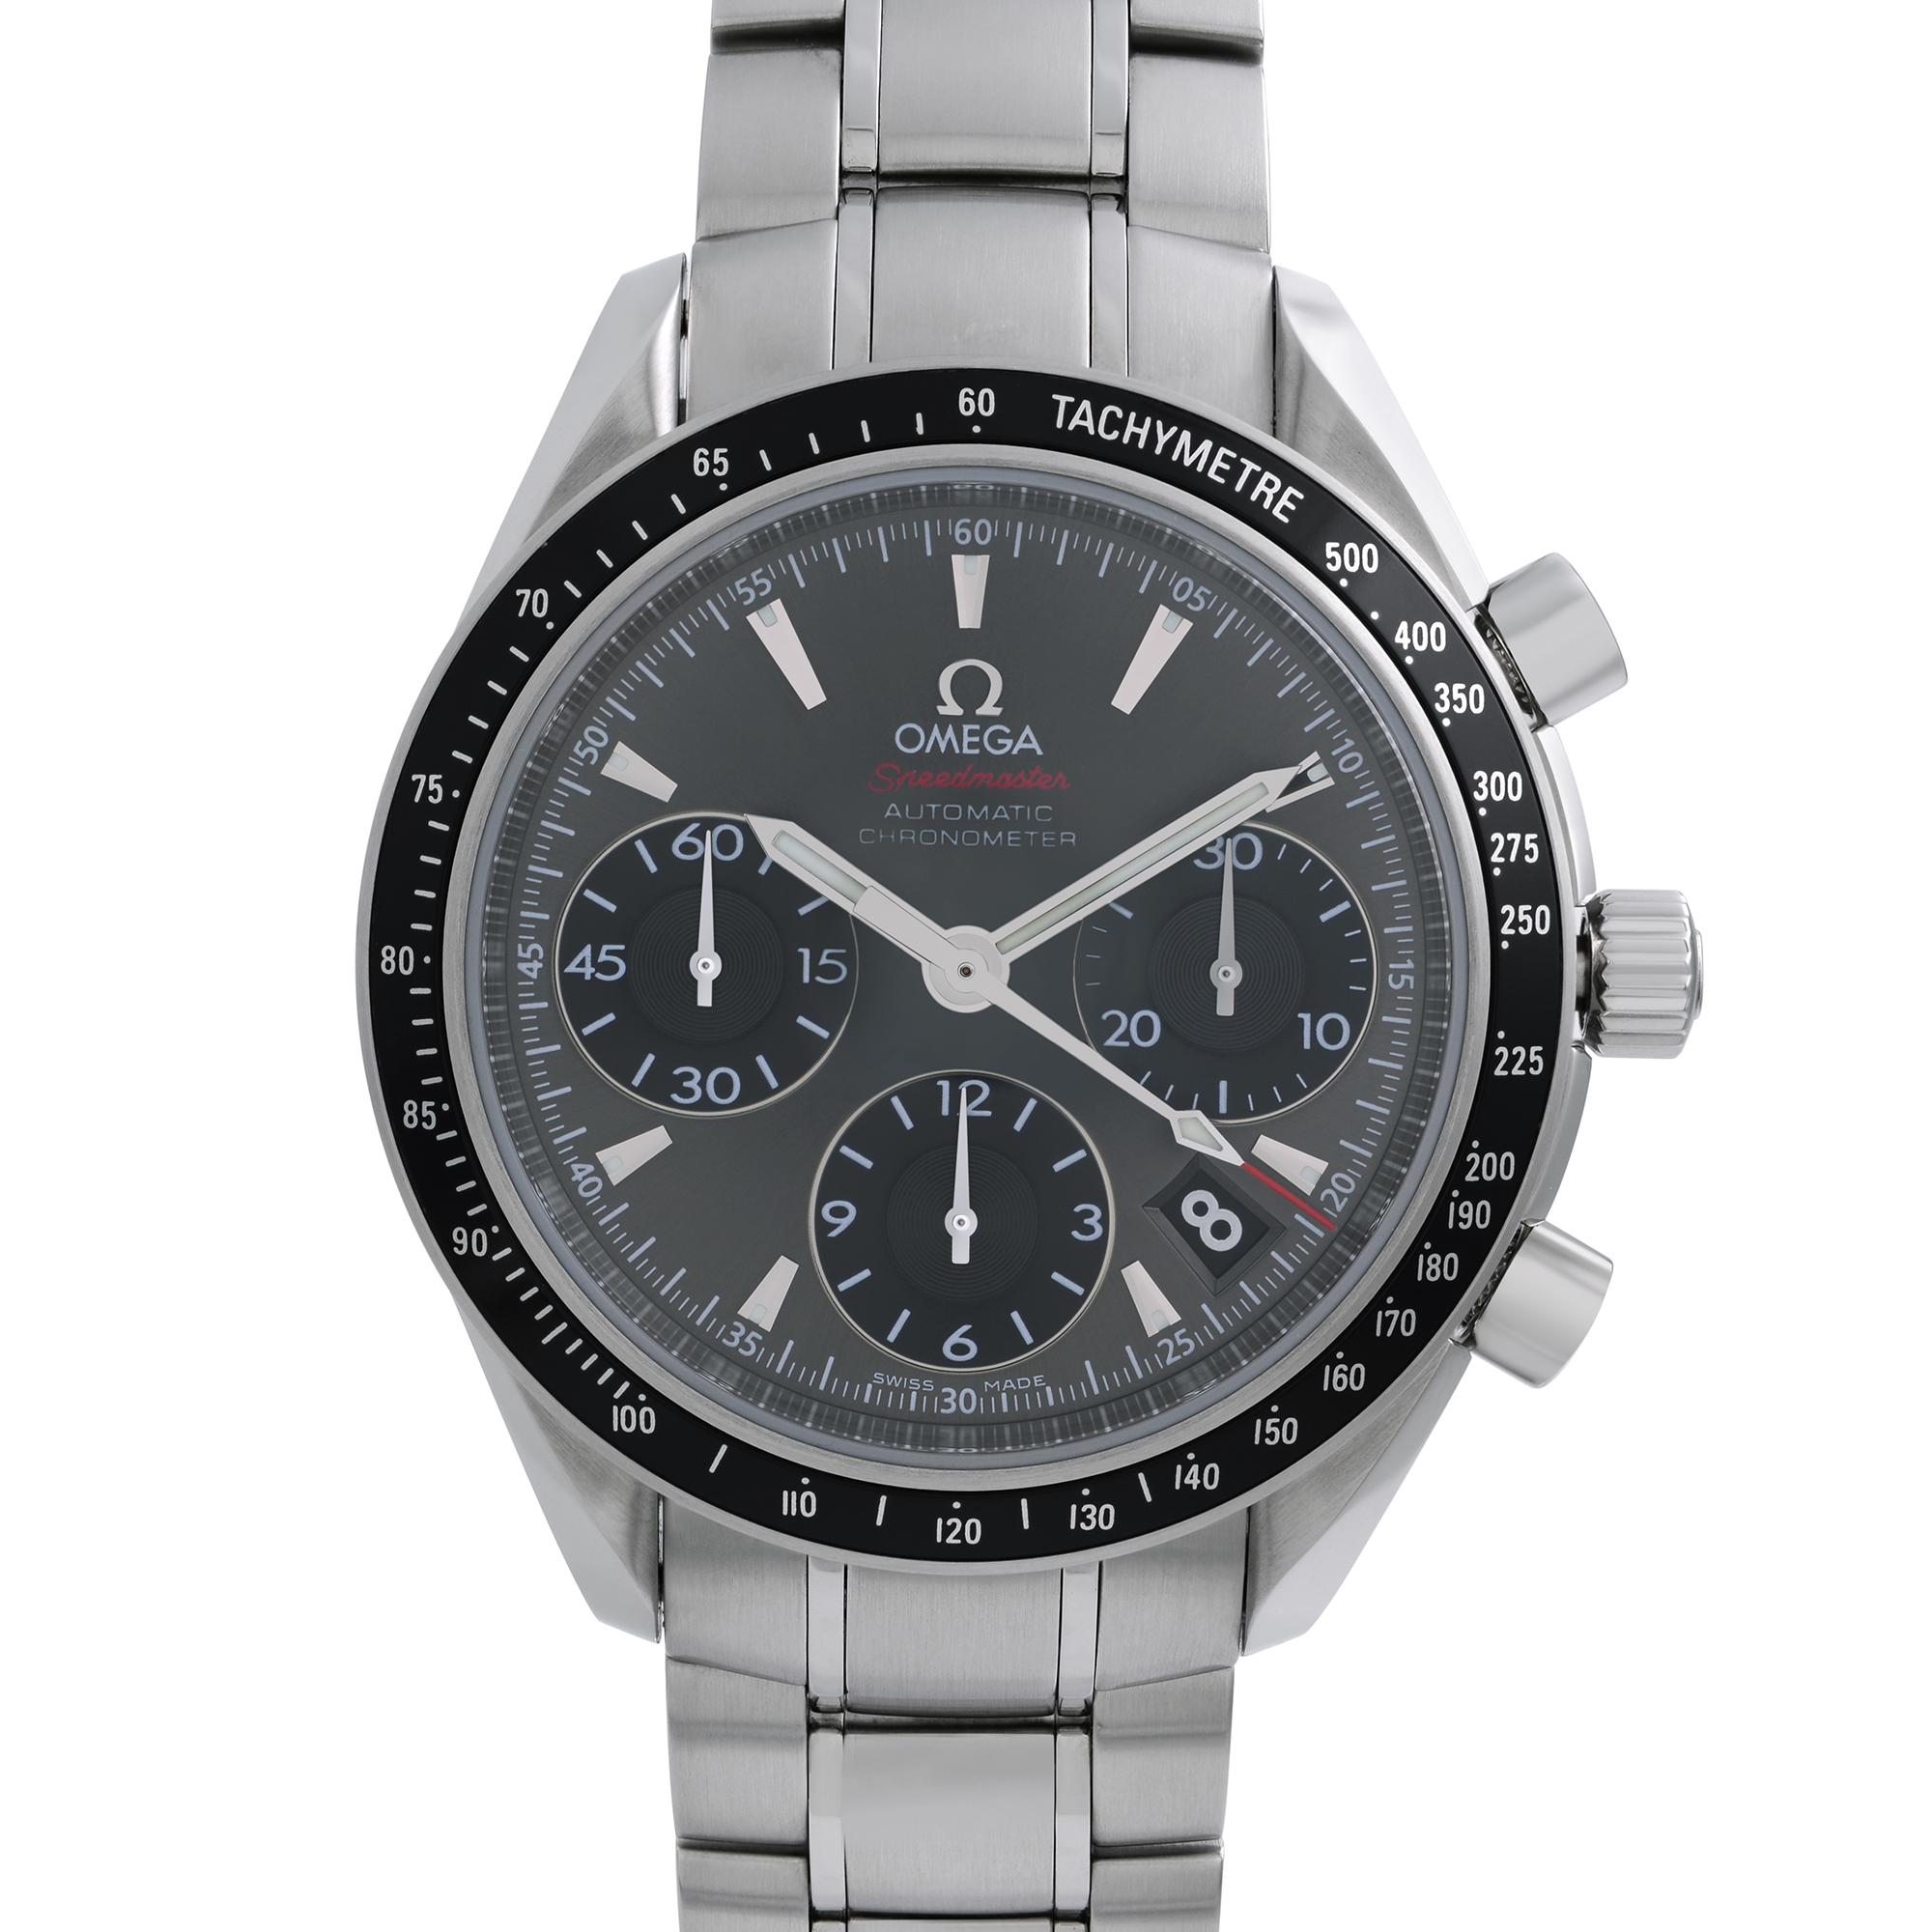 Pre-Owned Omega Speedmaster Steel Grey Dial Automatic Men's Watch. This Beautiful Timepiece Features: Stainless Steel Case with a Stainless Steel Bracelet, Fixed Black Ion-Plated Bezel with Tachymeter. Original Box and Papers are Included. Covered